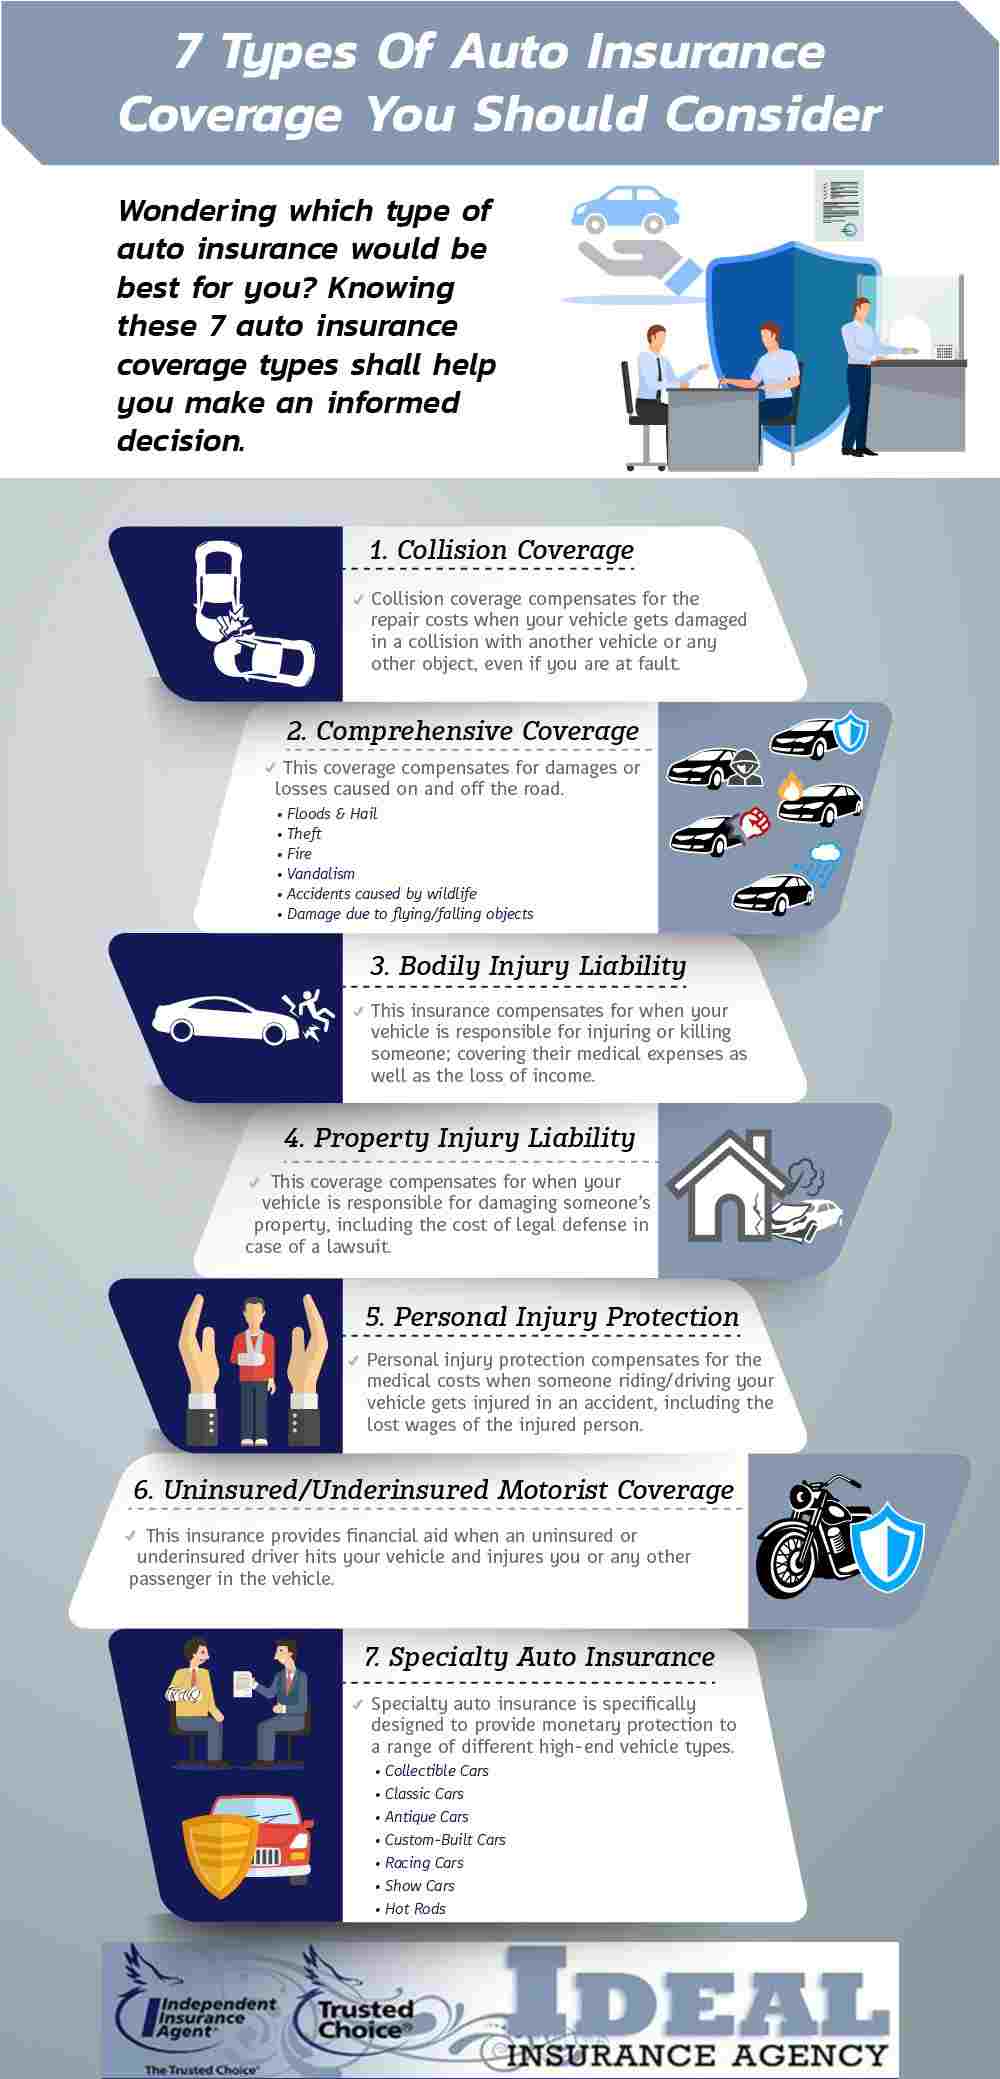 Auto Insurance Available at Ideal Insurance Agency